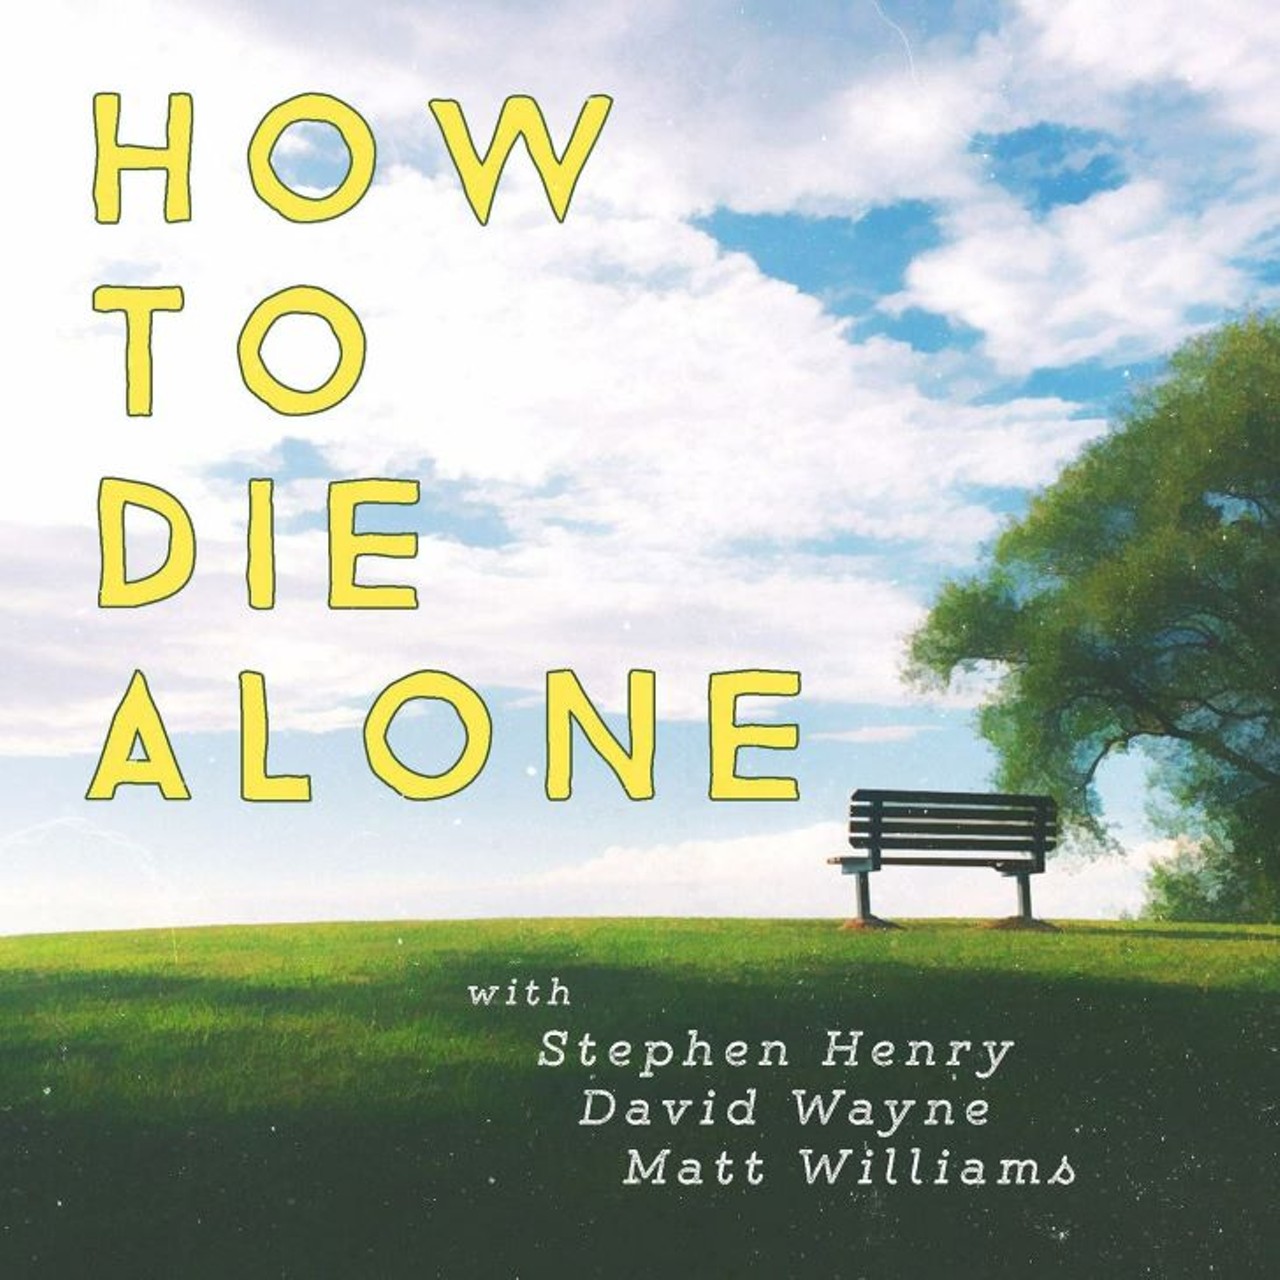 How To Die Alone
The comedy podcast&#146;s tagline says a lot (&#147;A podcast for the broken person inside all of us. If you've ever wondered how to find delight in oblivion, wonder no more&#148;), but tuning into the more than 100 episodes lands you in a room with hosts Stephen Henry, David Wayne and Matt Williams who aren&#146;t holding their tongues about any topic. @htdapodcast on Twitter 
Photo via How To Die Alone/Facebook